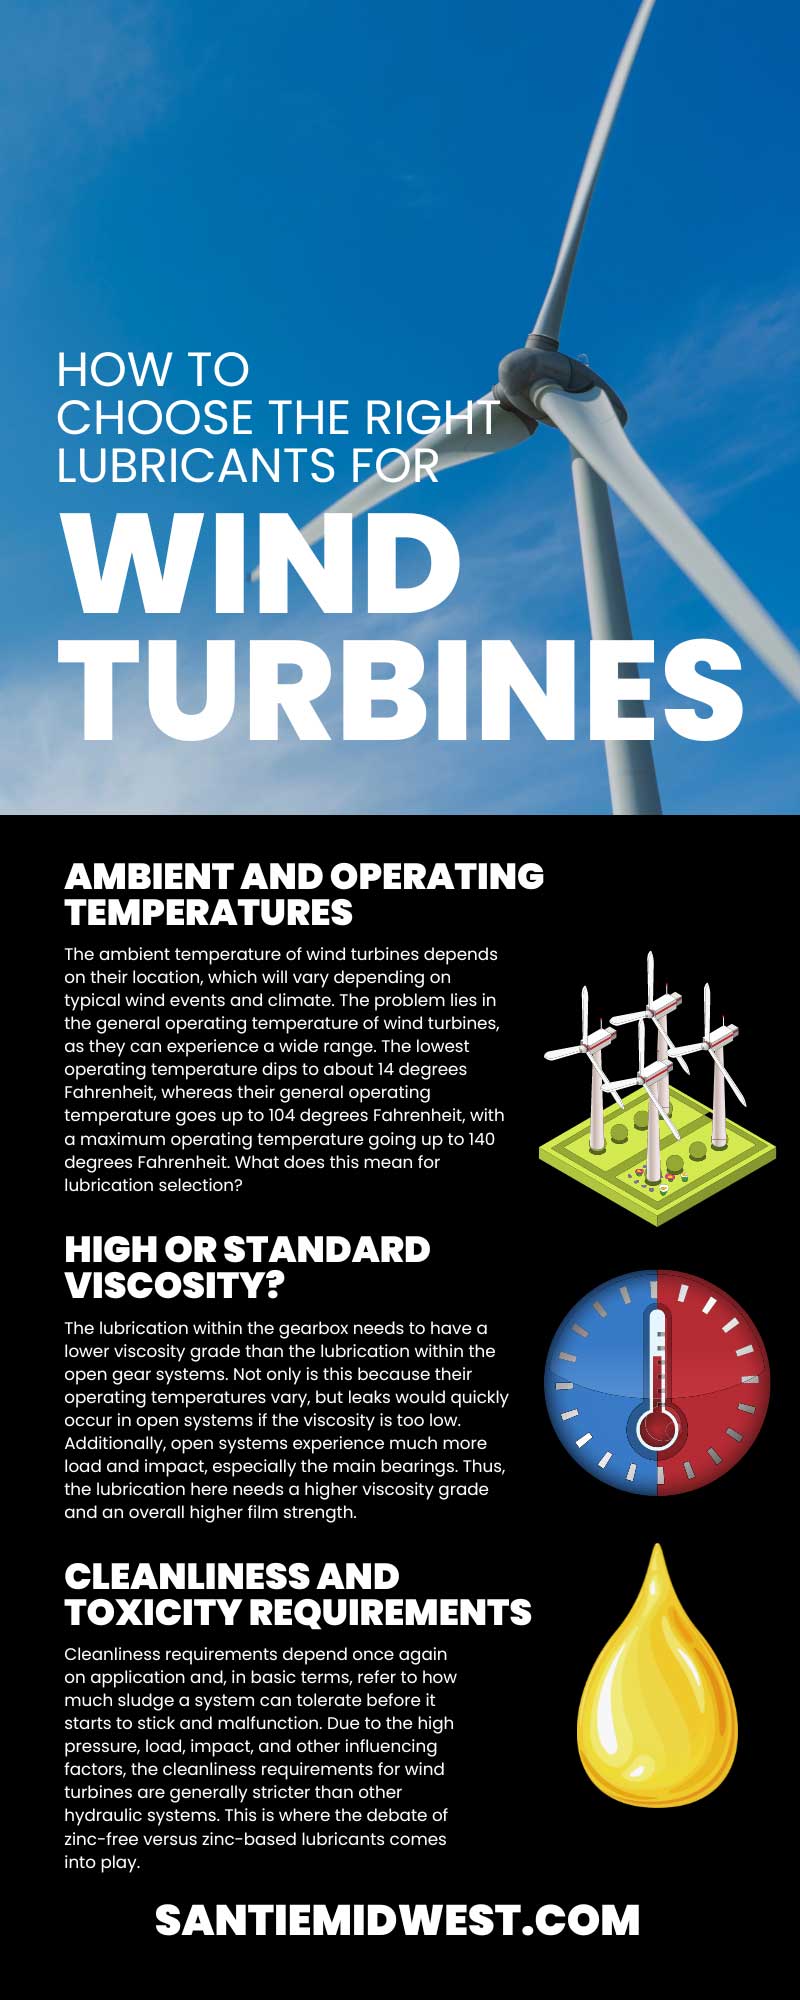 How To Choose the Right Lubricants for Wind Turbines